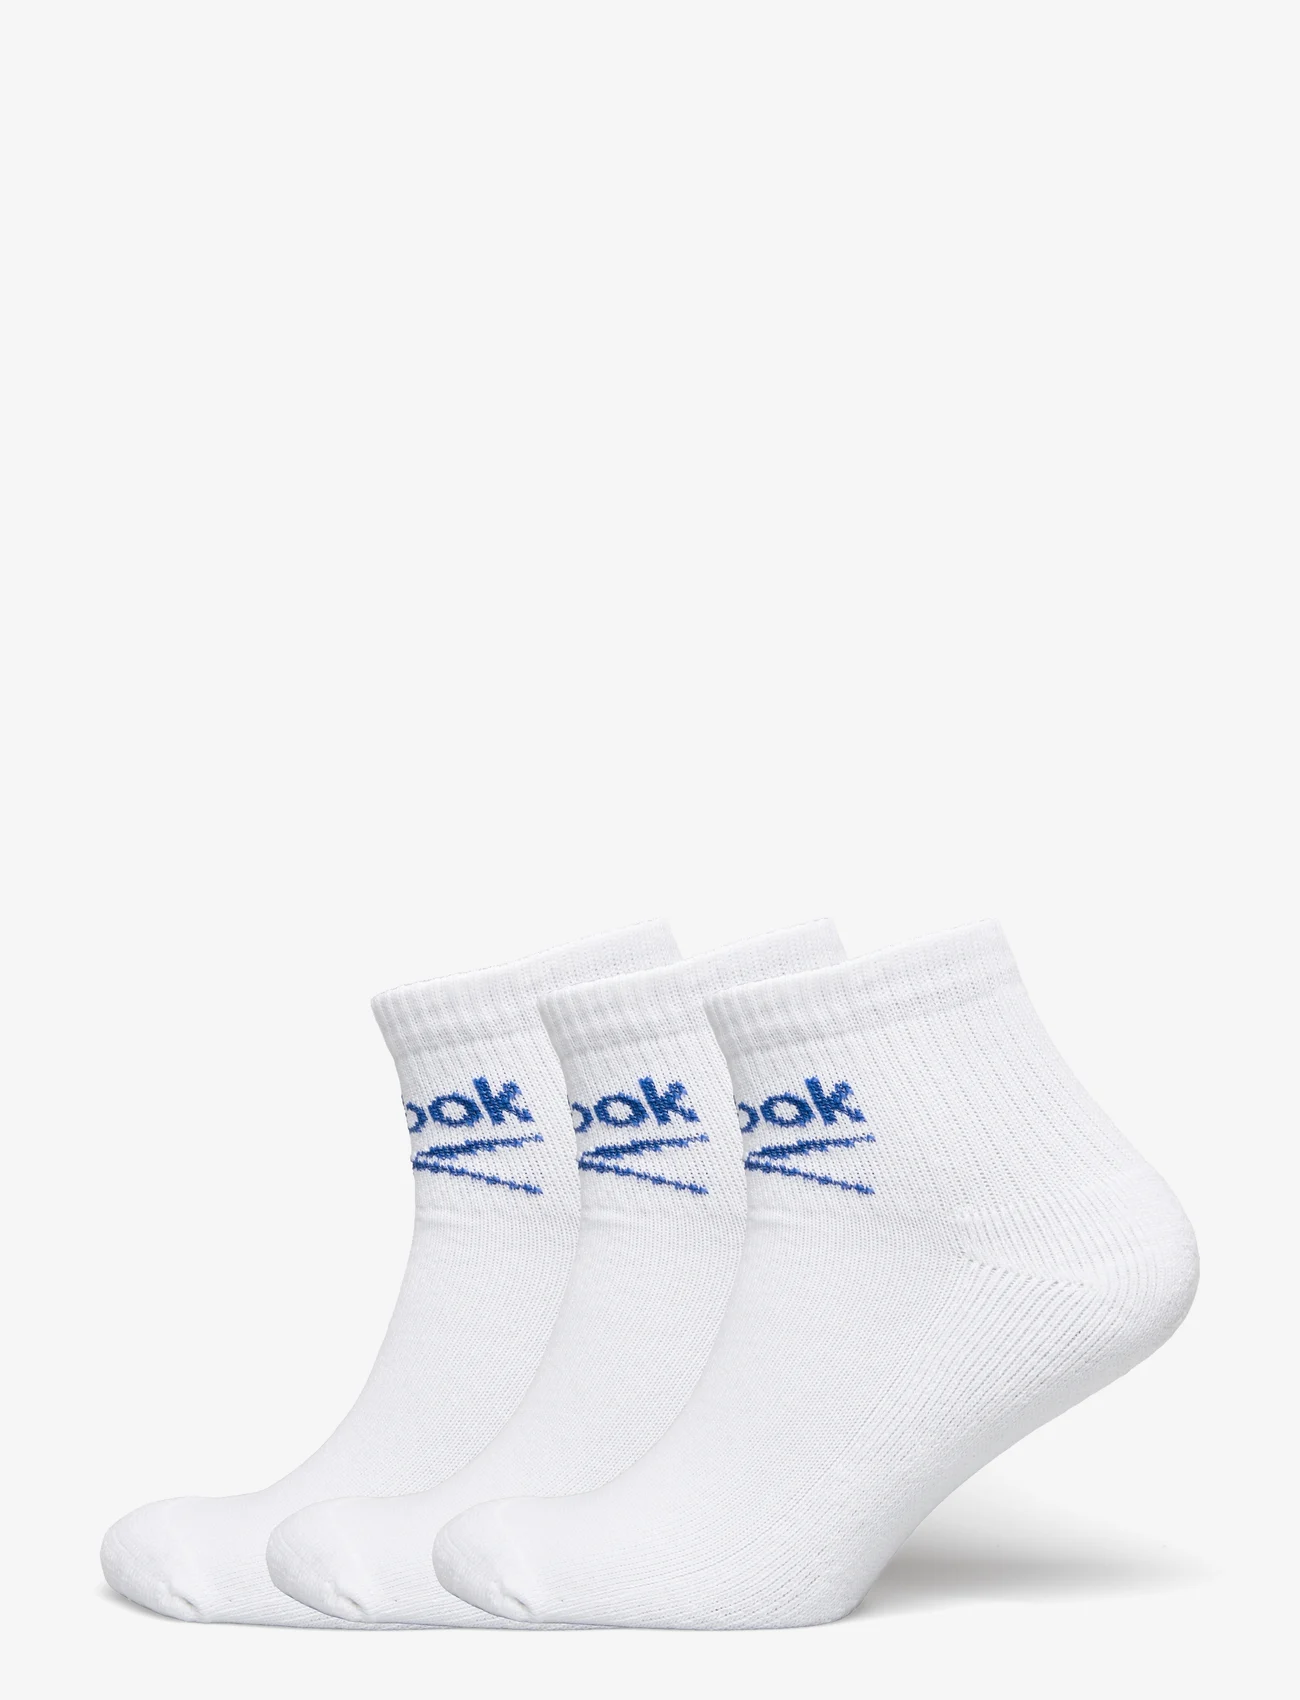 Reebok Performance - Sock Ankle - lowest prices - white - 0